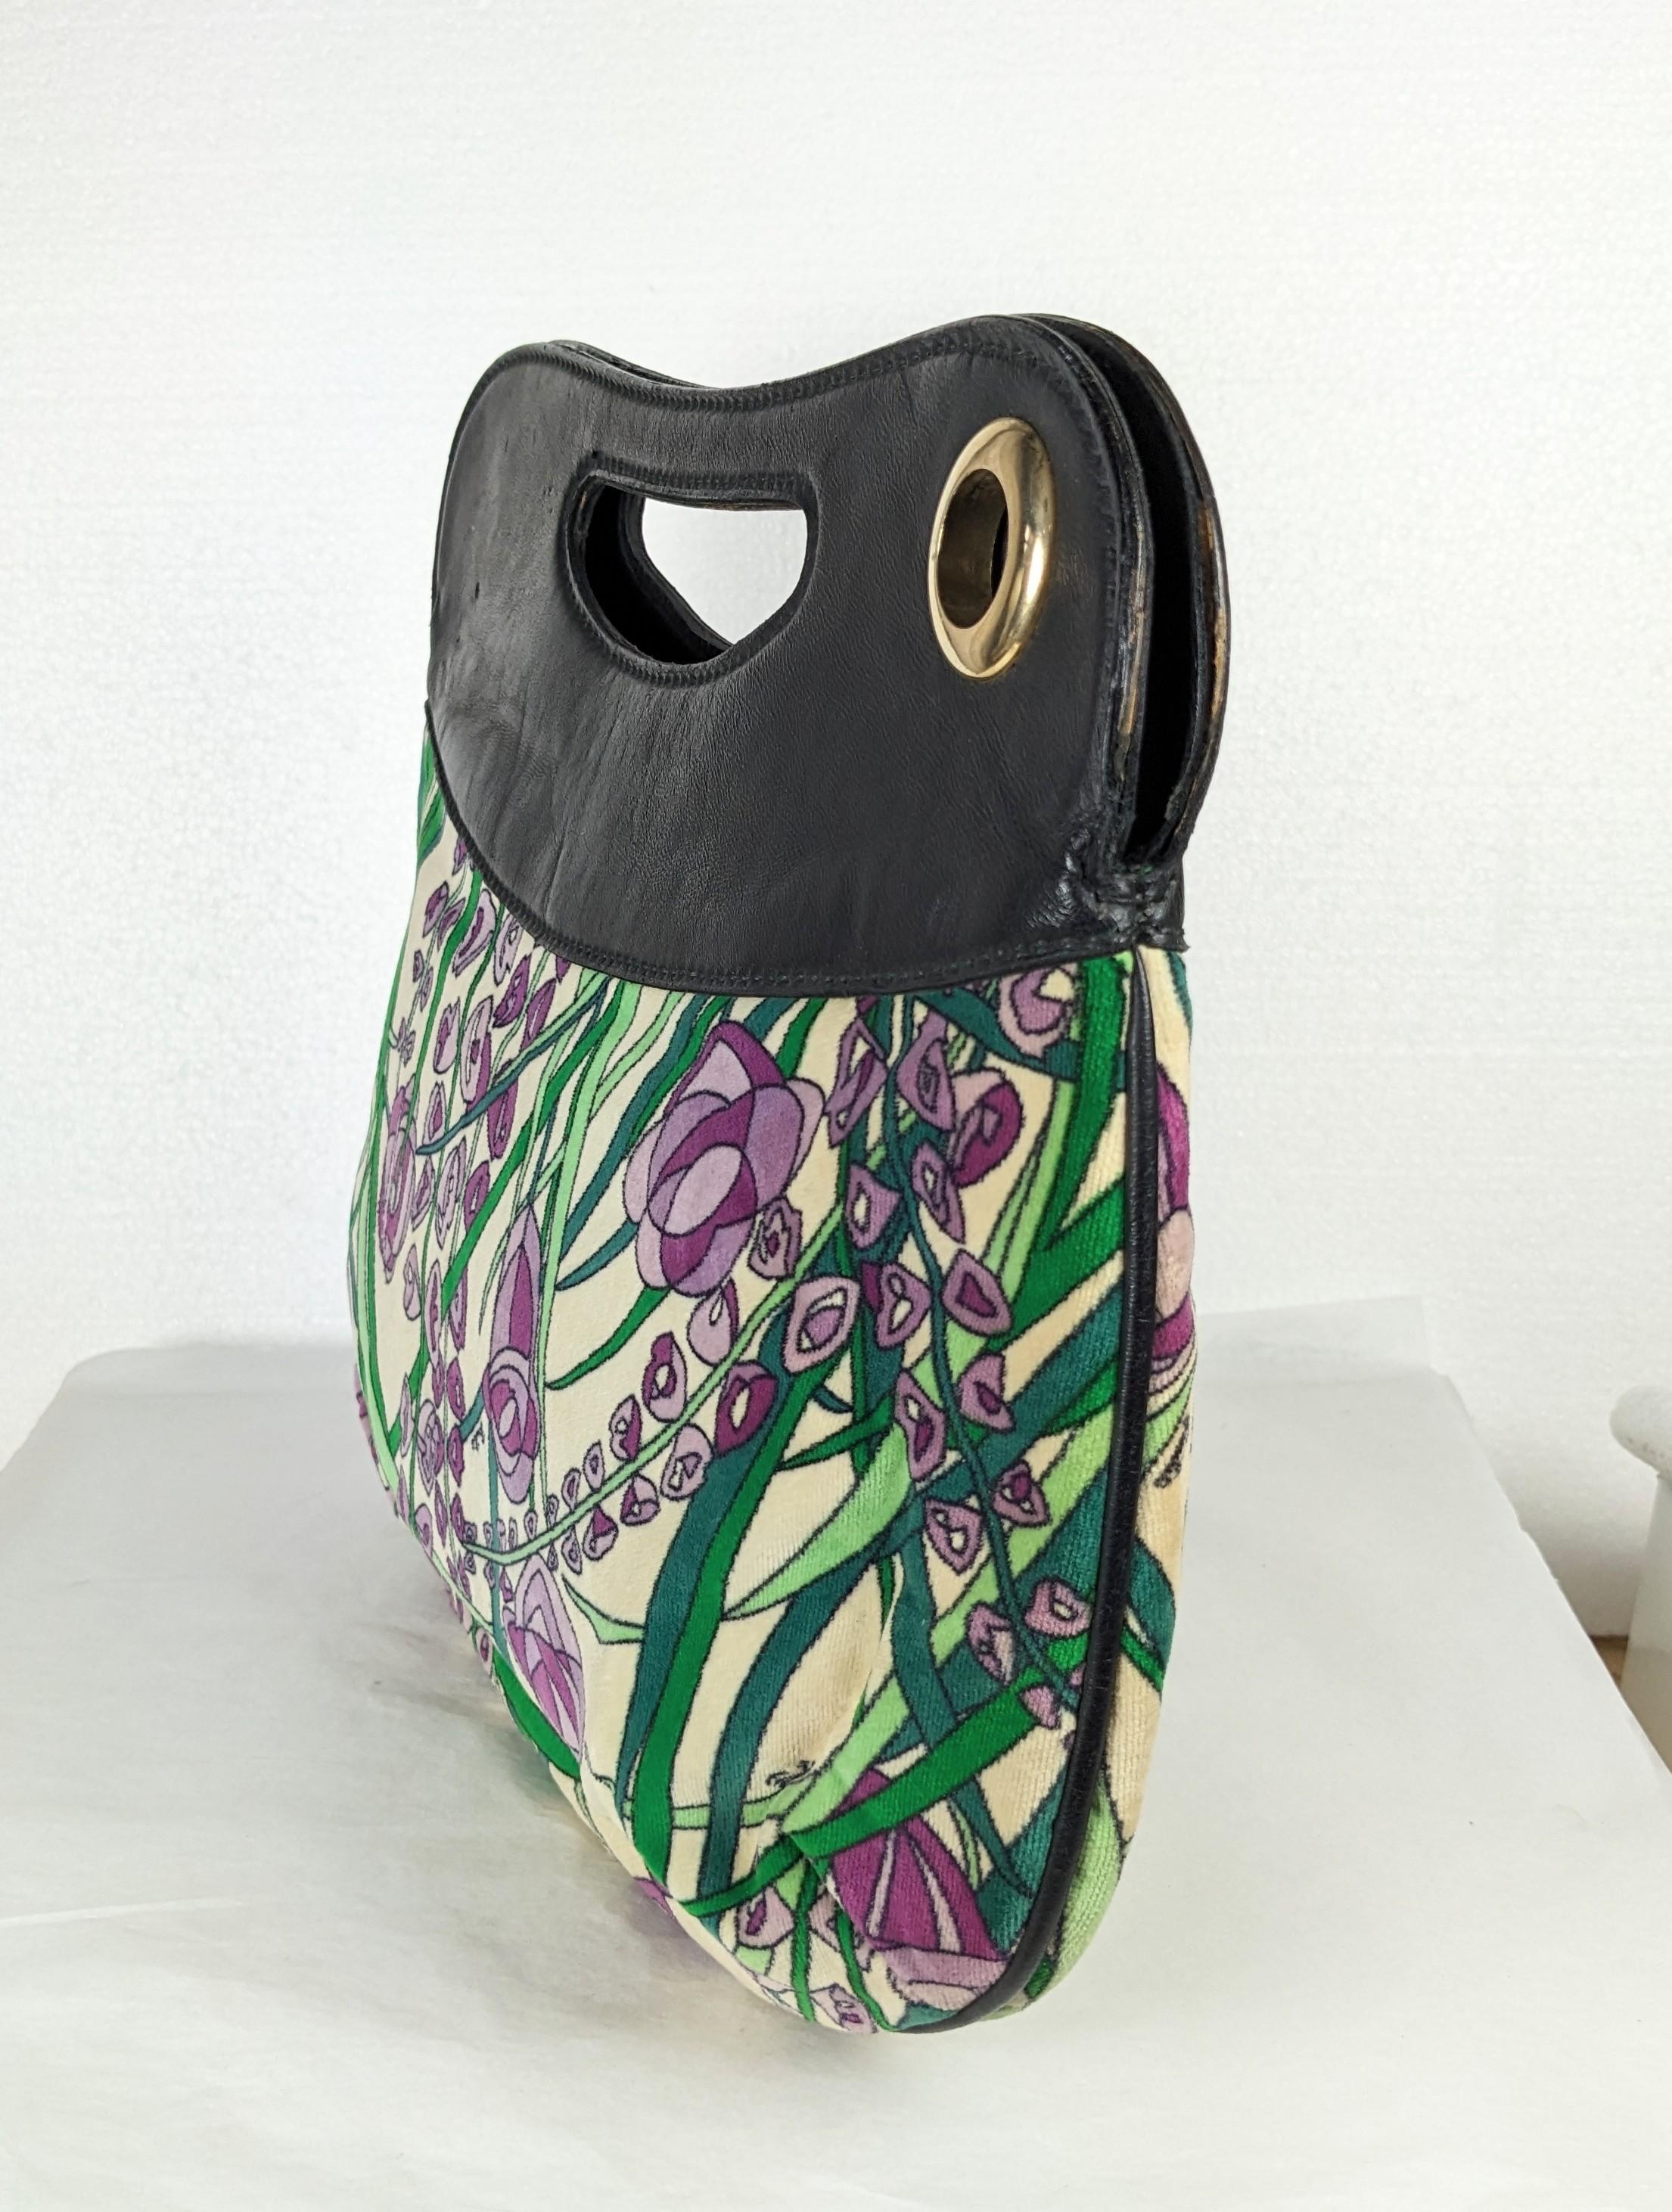 Emilio Pucci Transformable Top Handle Clutch  In Good Condition For Sale In New York, NY